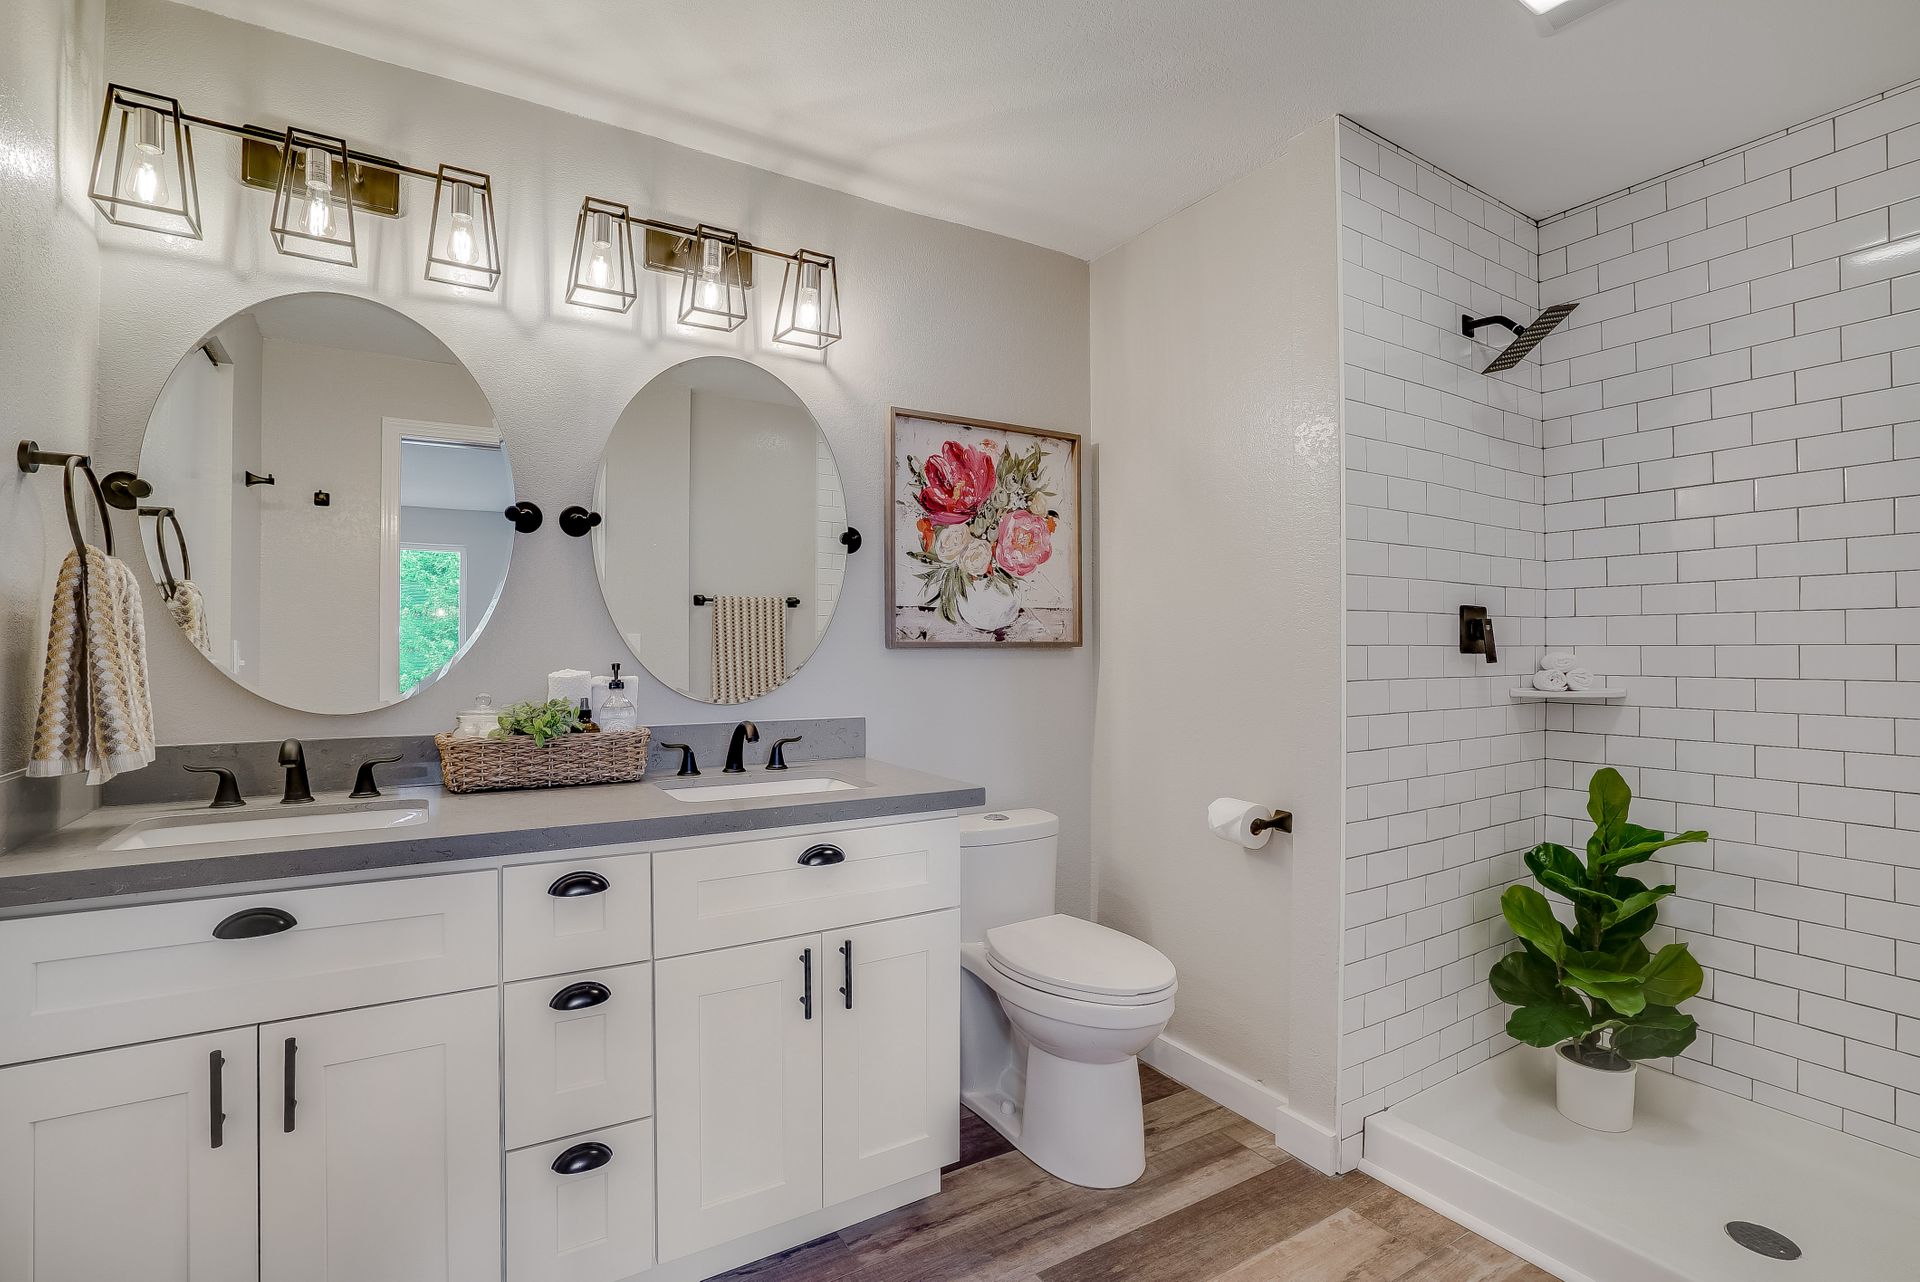 Dream Bathrooms Trends: Fewer Tubs, More Walls Around Toilets